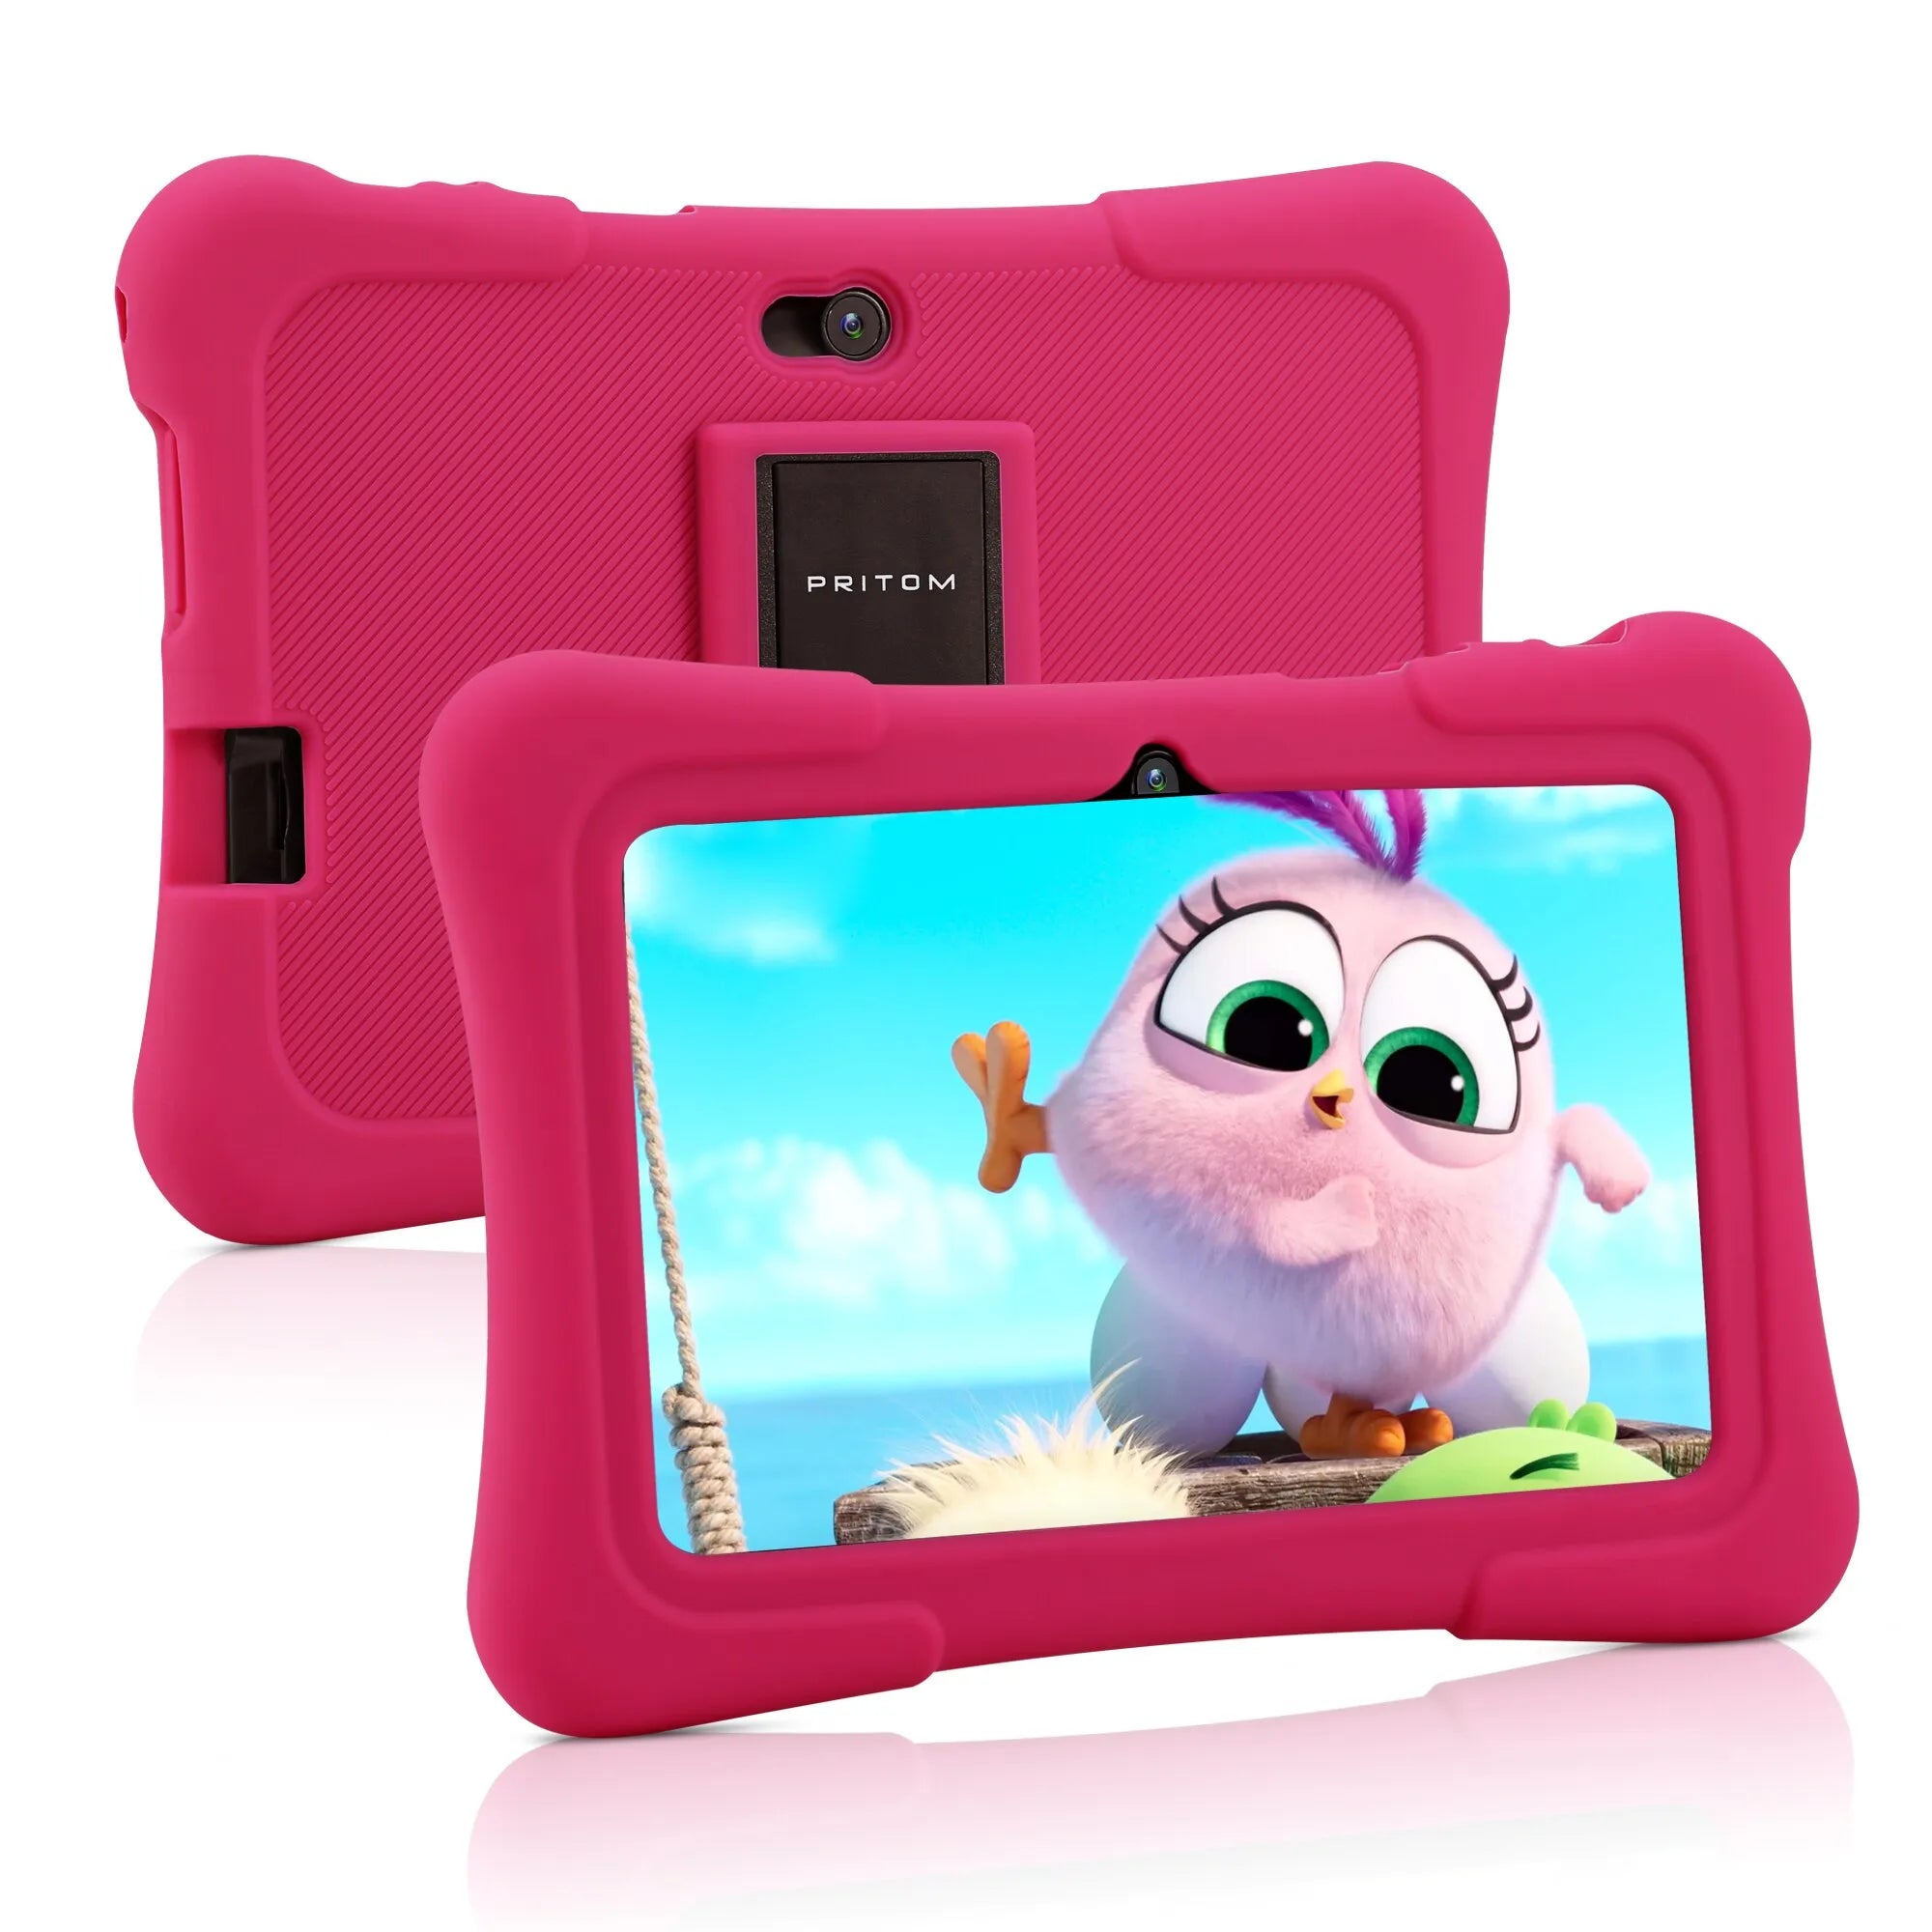 PRITOM 7 Inch Kids Tablet - Quad Core, Android 10, 32GB Storage, WiFi, Bluetooth, Educational Software EU / rose pink